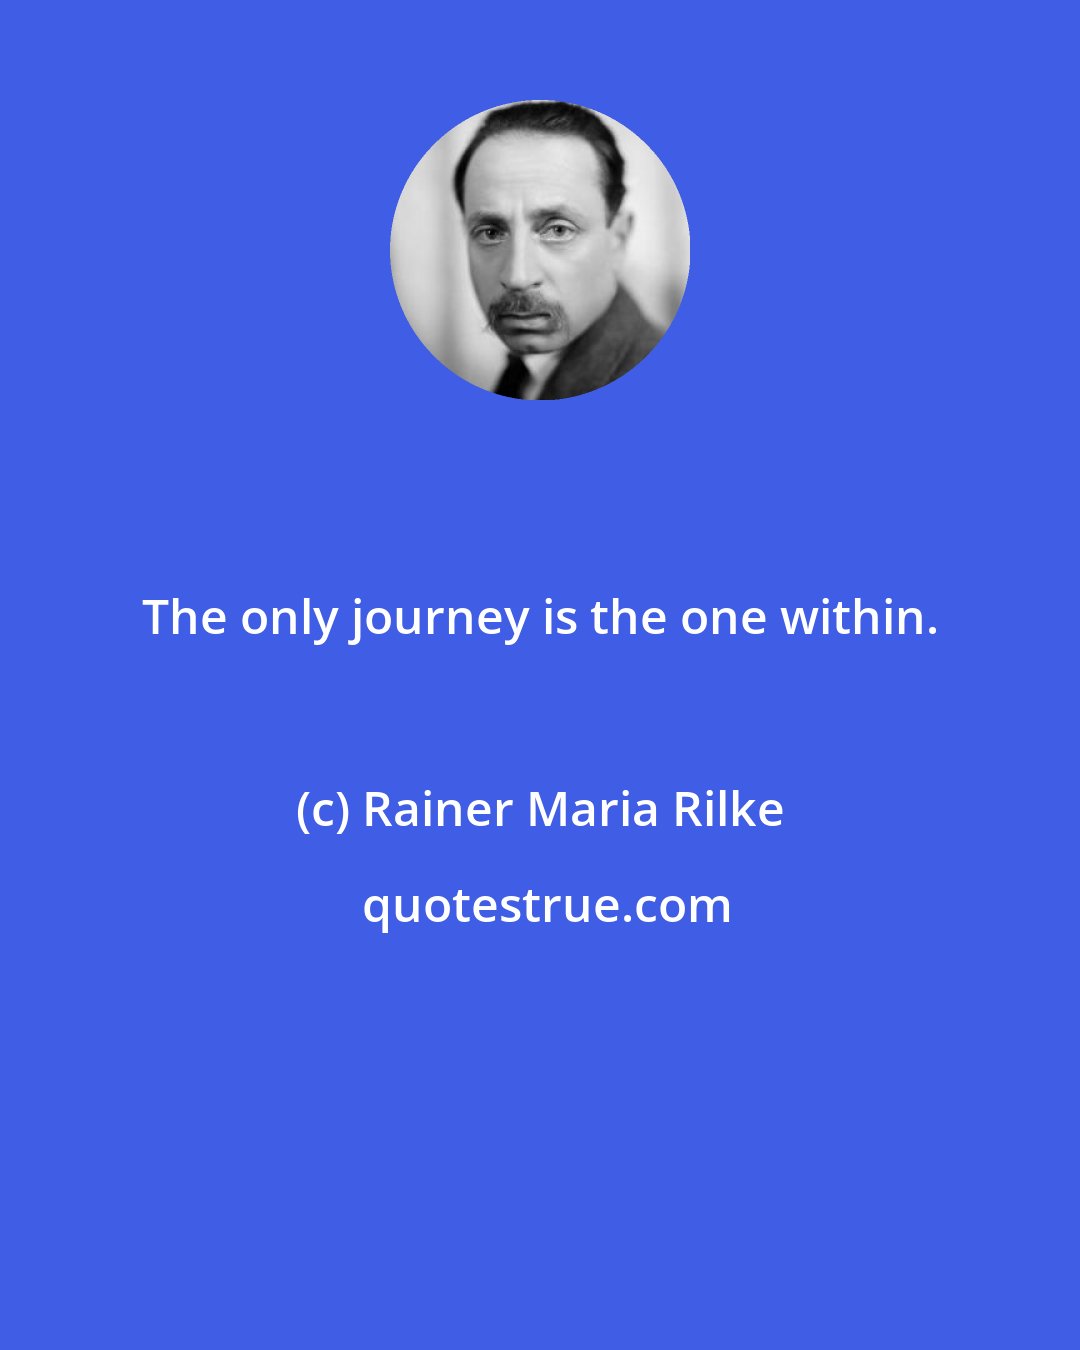 Rainer Maria Rilke: The only journey is the one within.